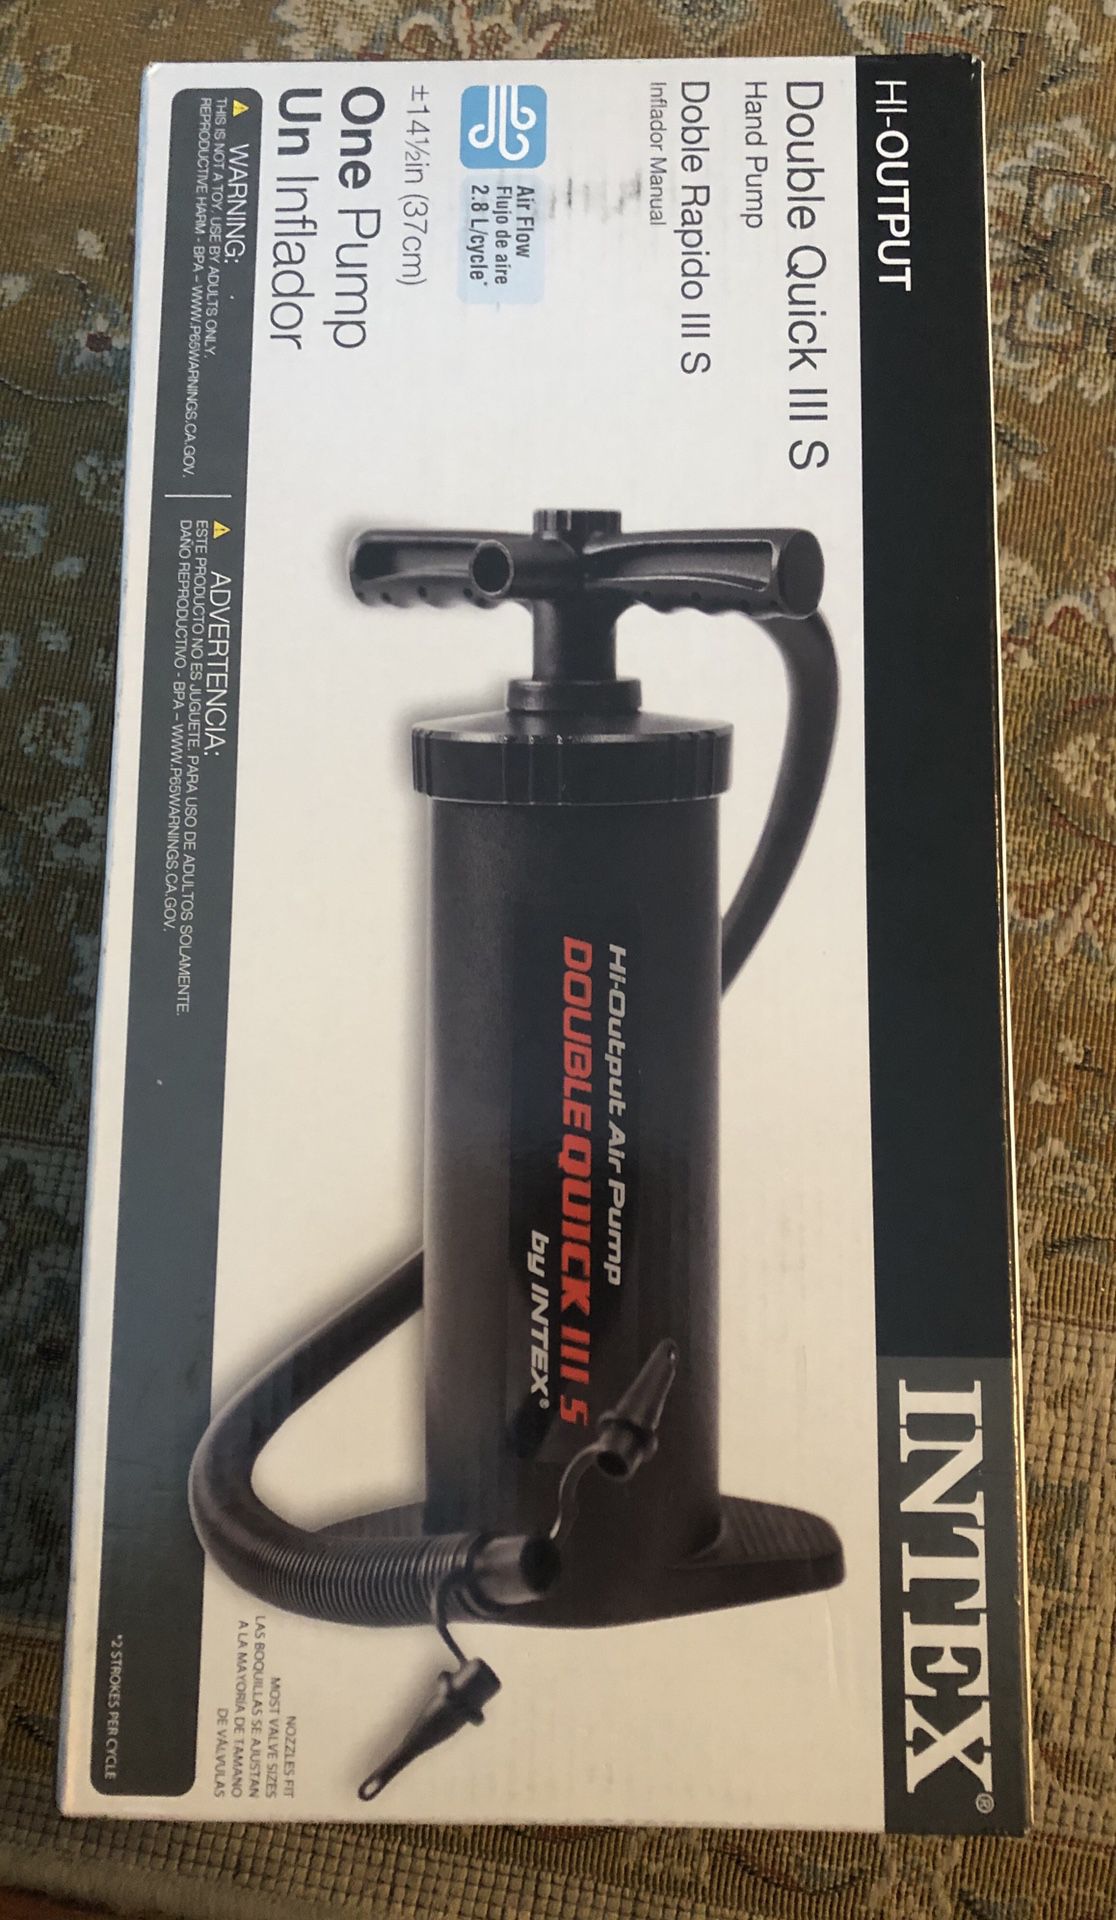 New Hand pump for air mattress and inflatables.